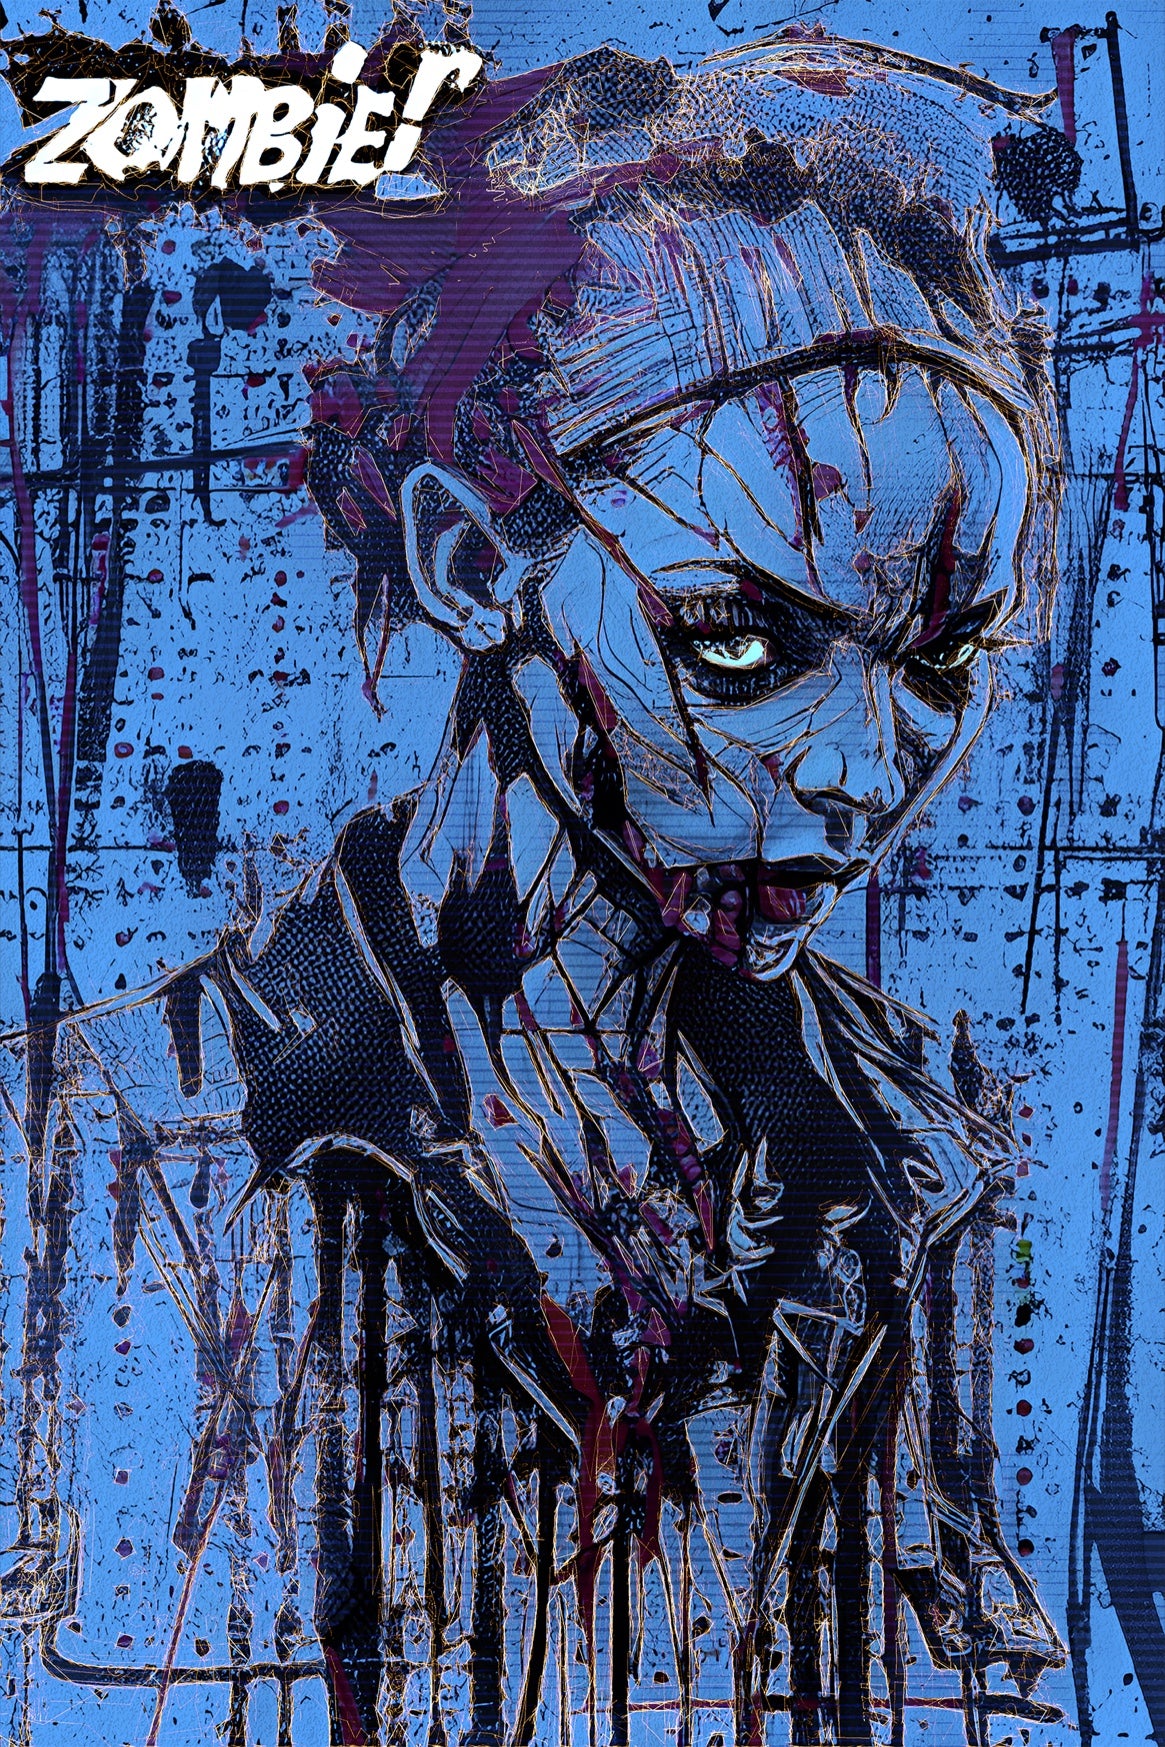 Wicked "Zombie" print featuring a zombie chick with a cool color scheme and golden lines